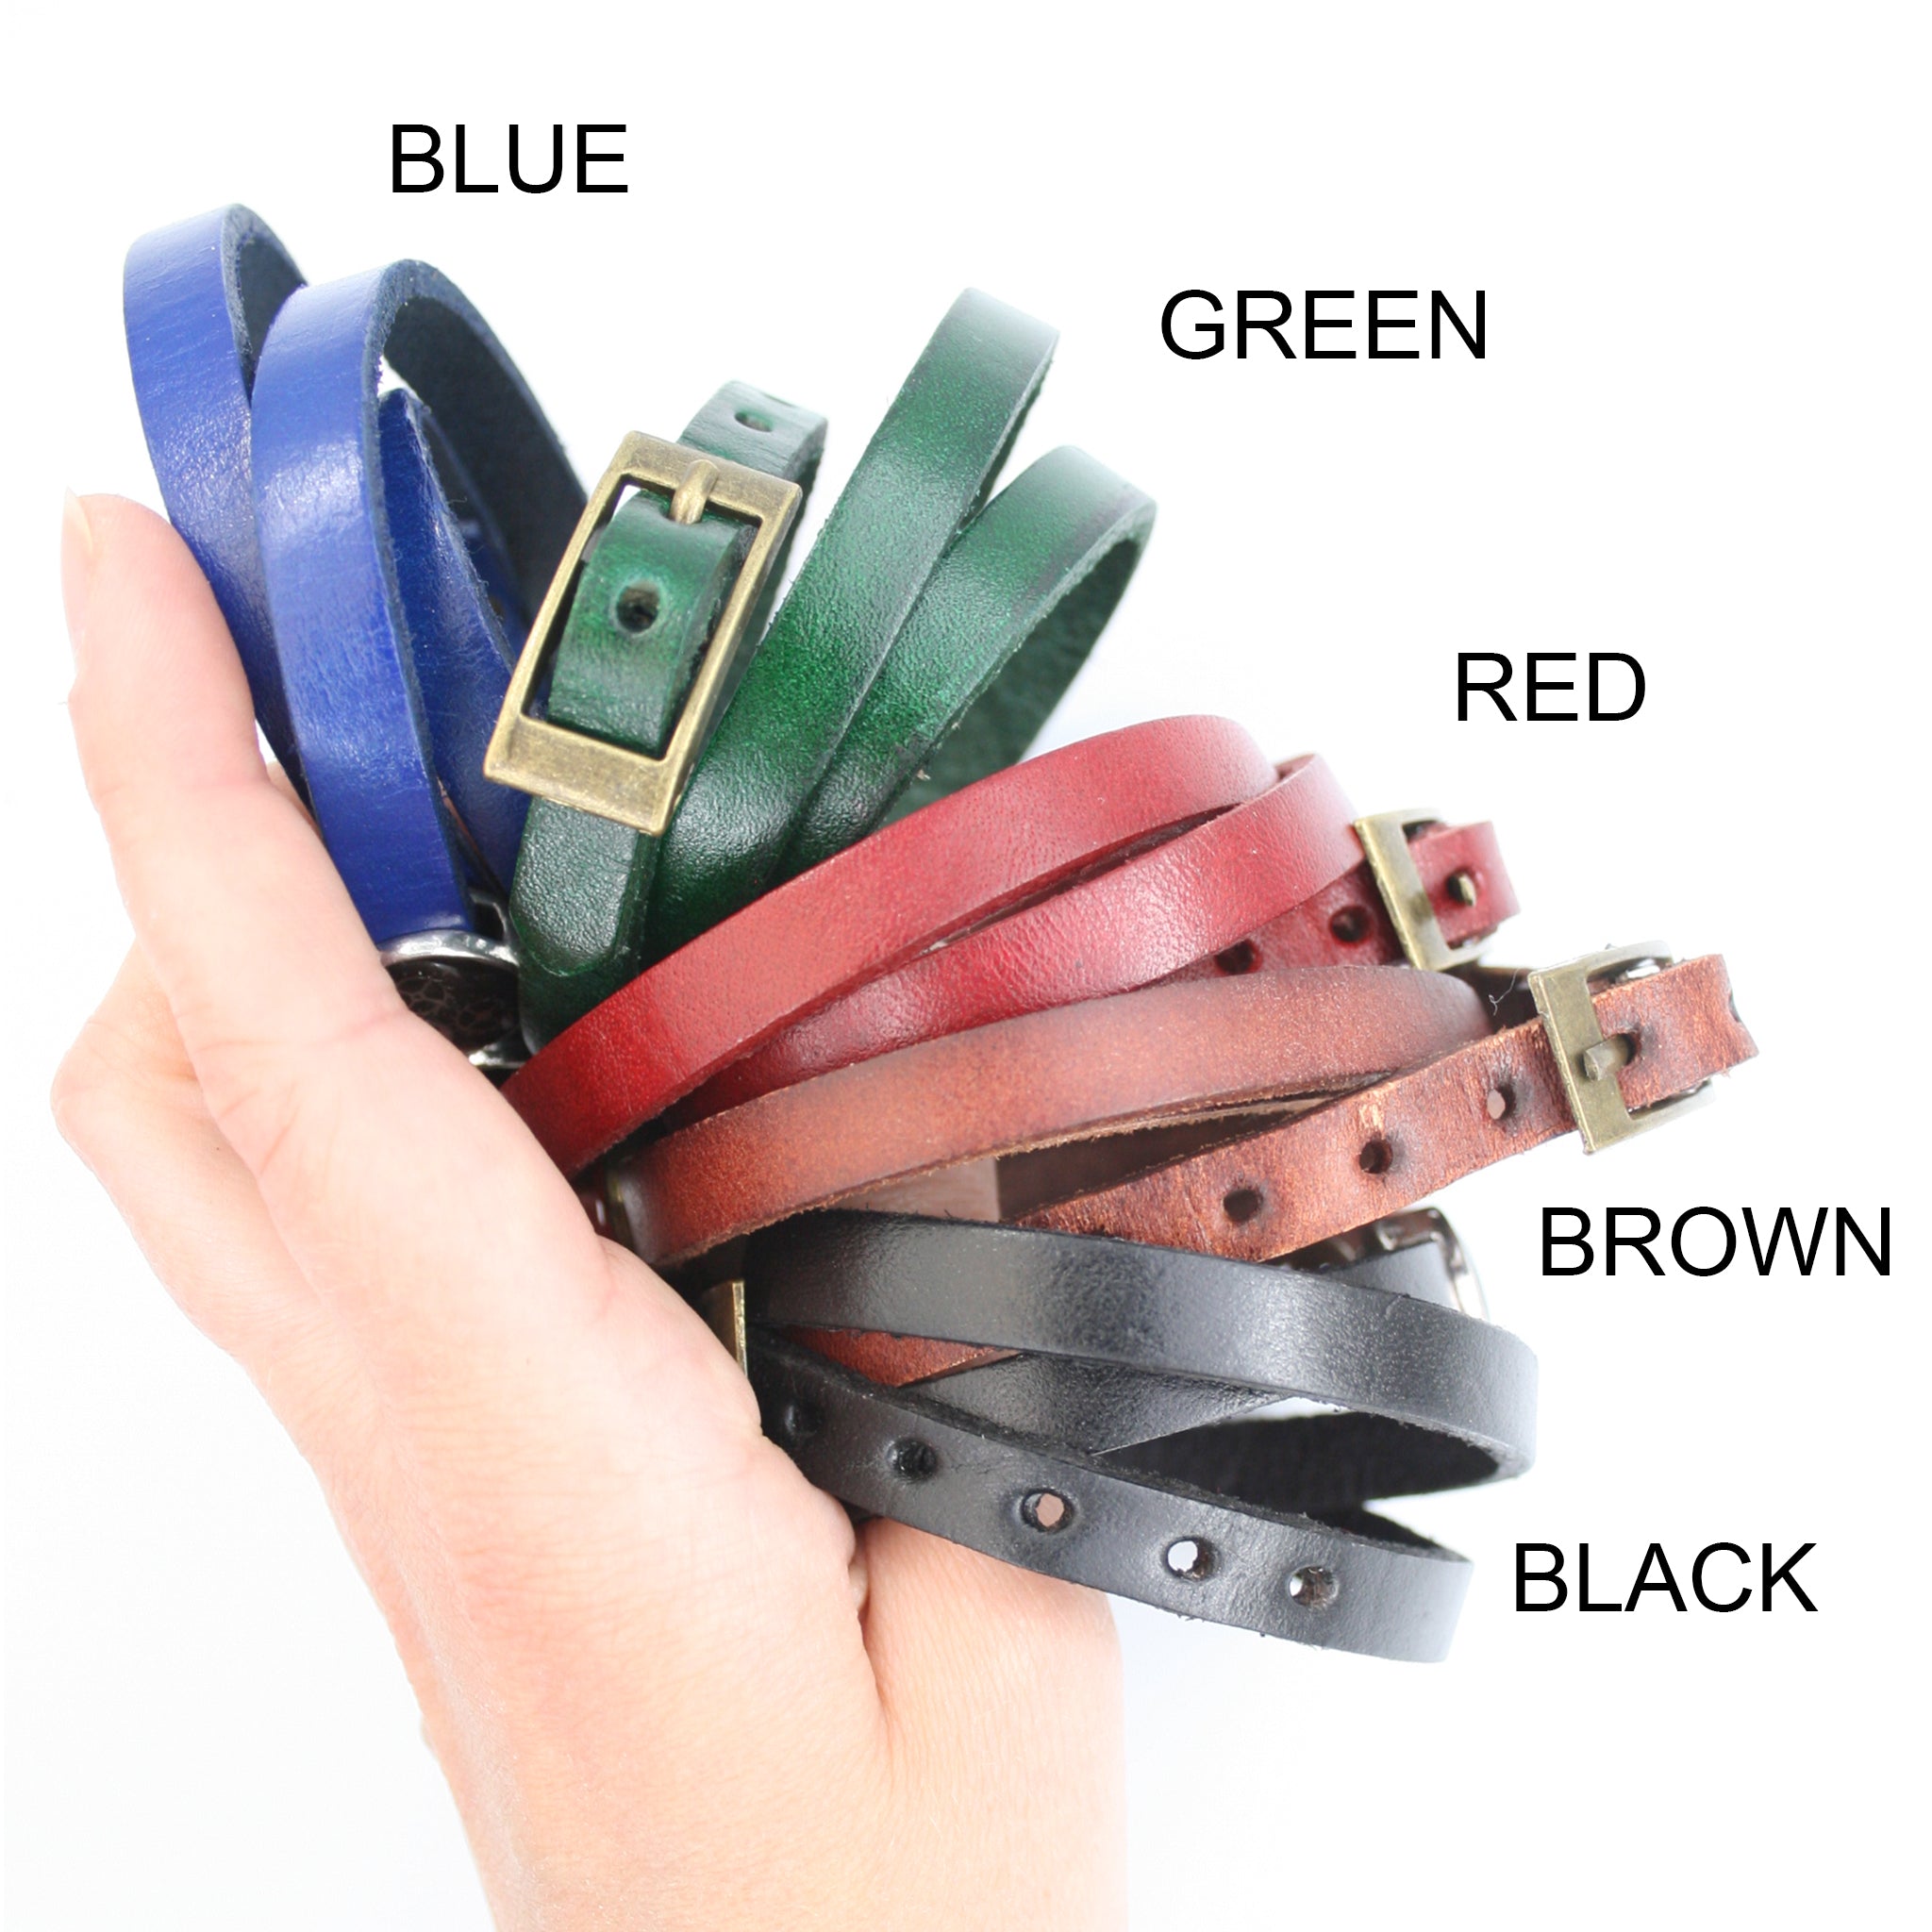 Blue, green, red, brown and black leather wrap bracelets